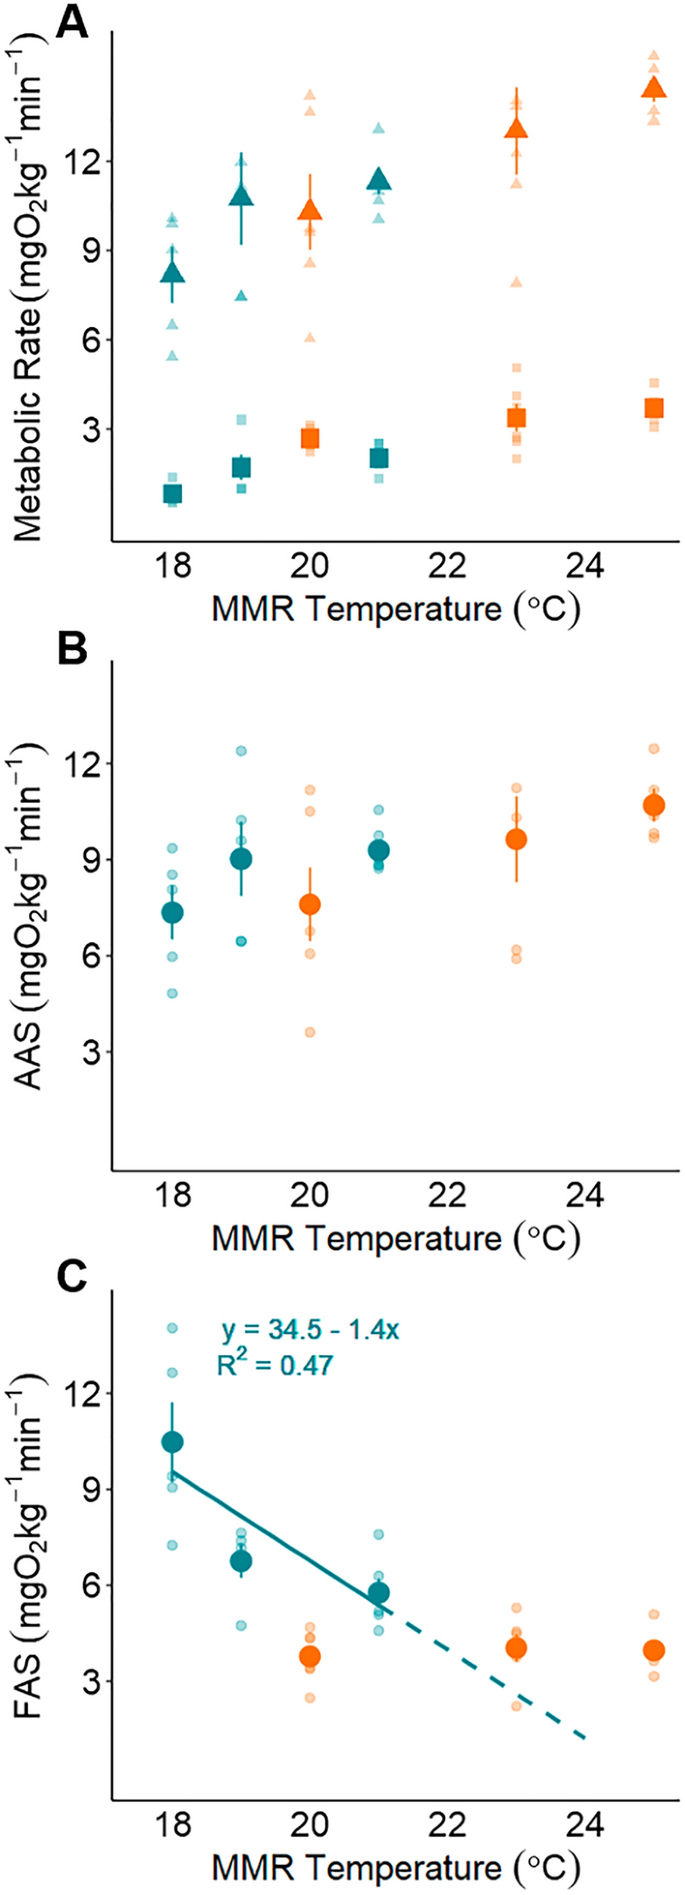 Thermal tolerance and vulnerability to warming differ between populations  of wild Oncorhynchus mykiss near the species' southern range limit